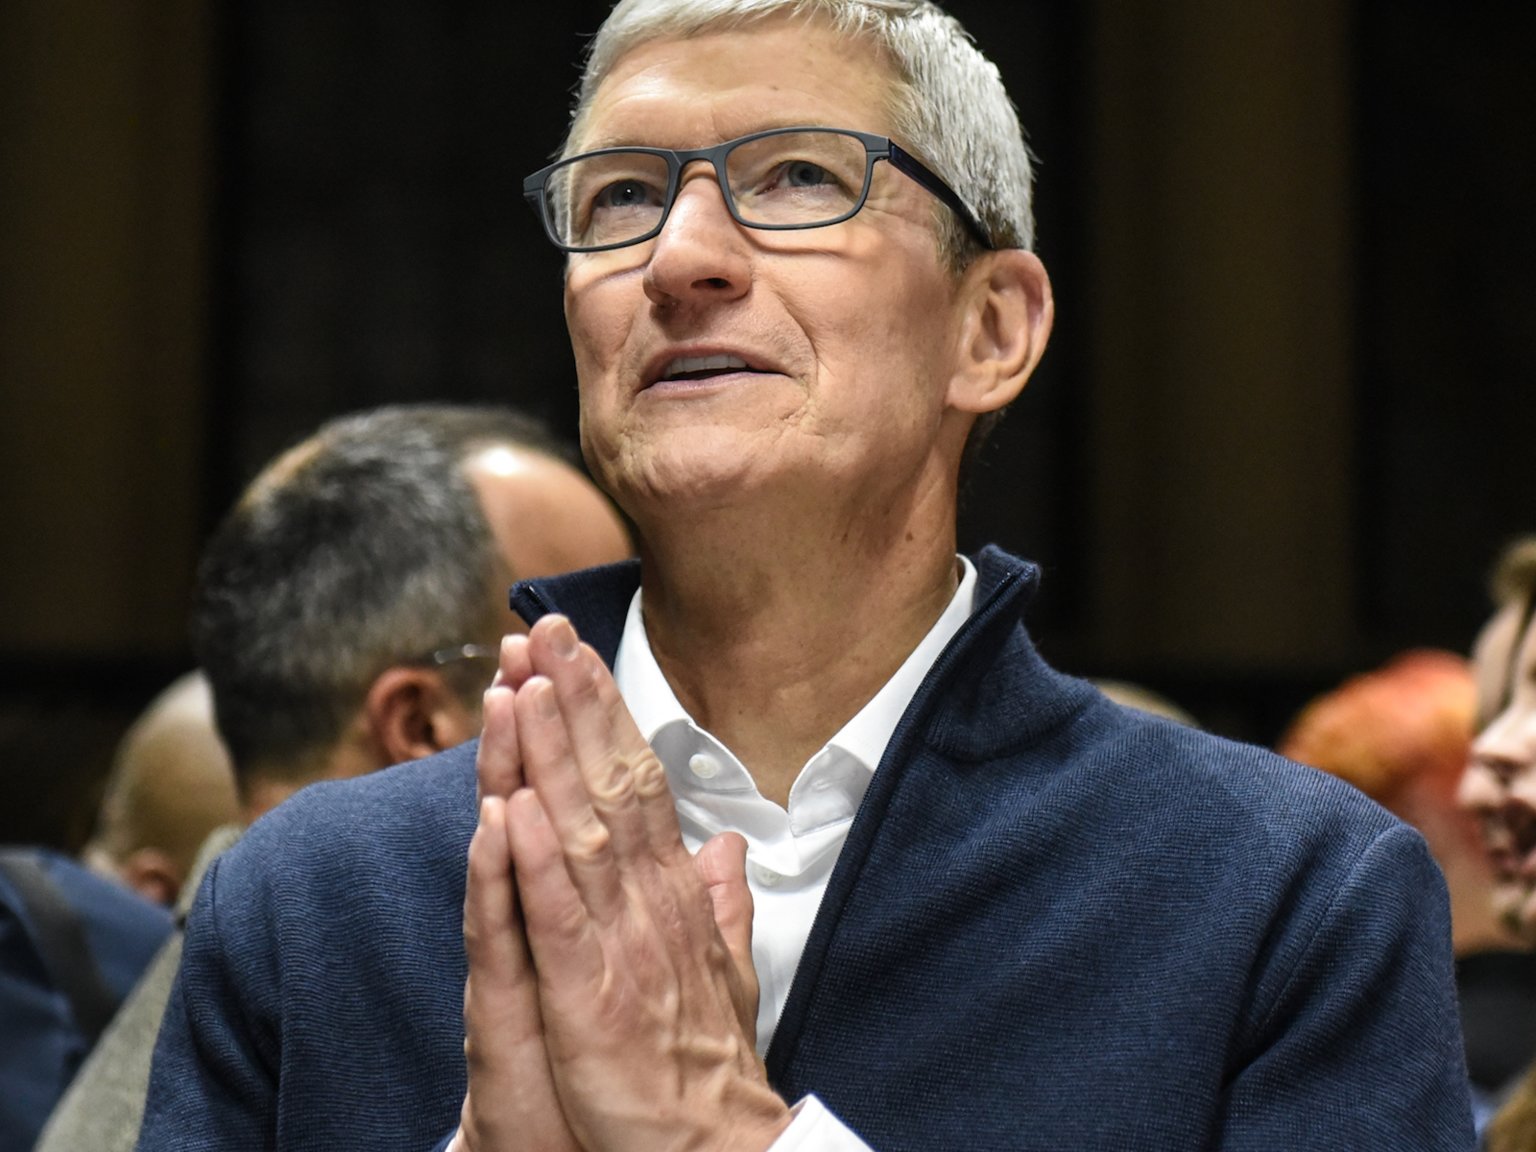 Apple CEO Tim Cook. | Getty Images